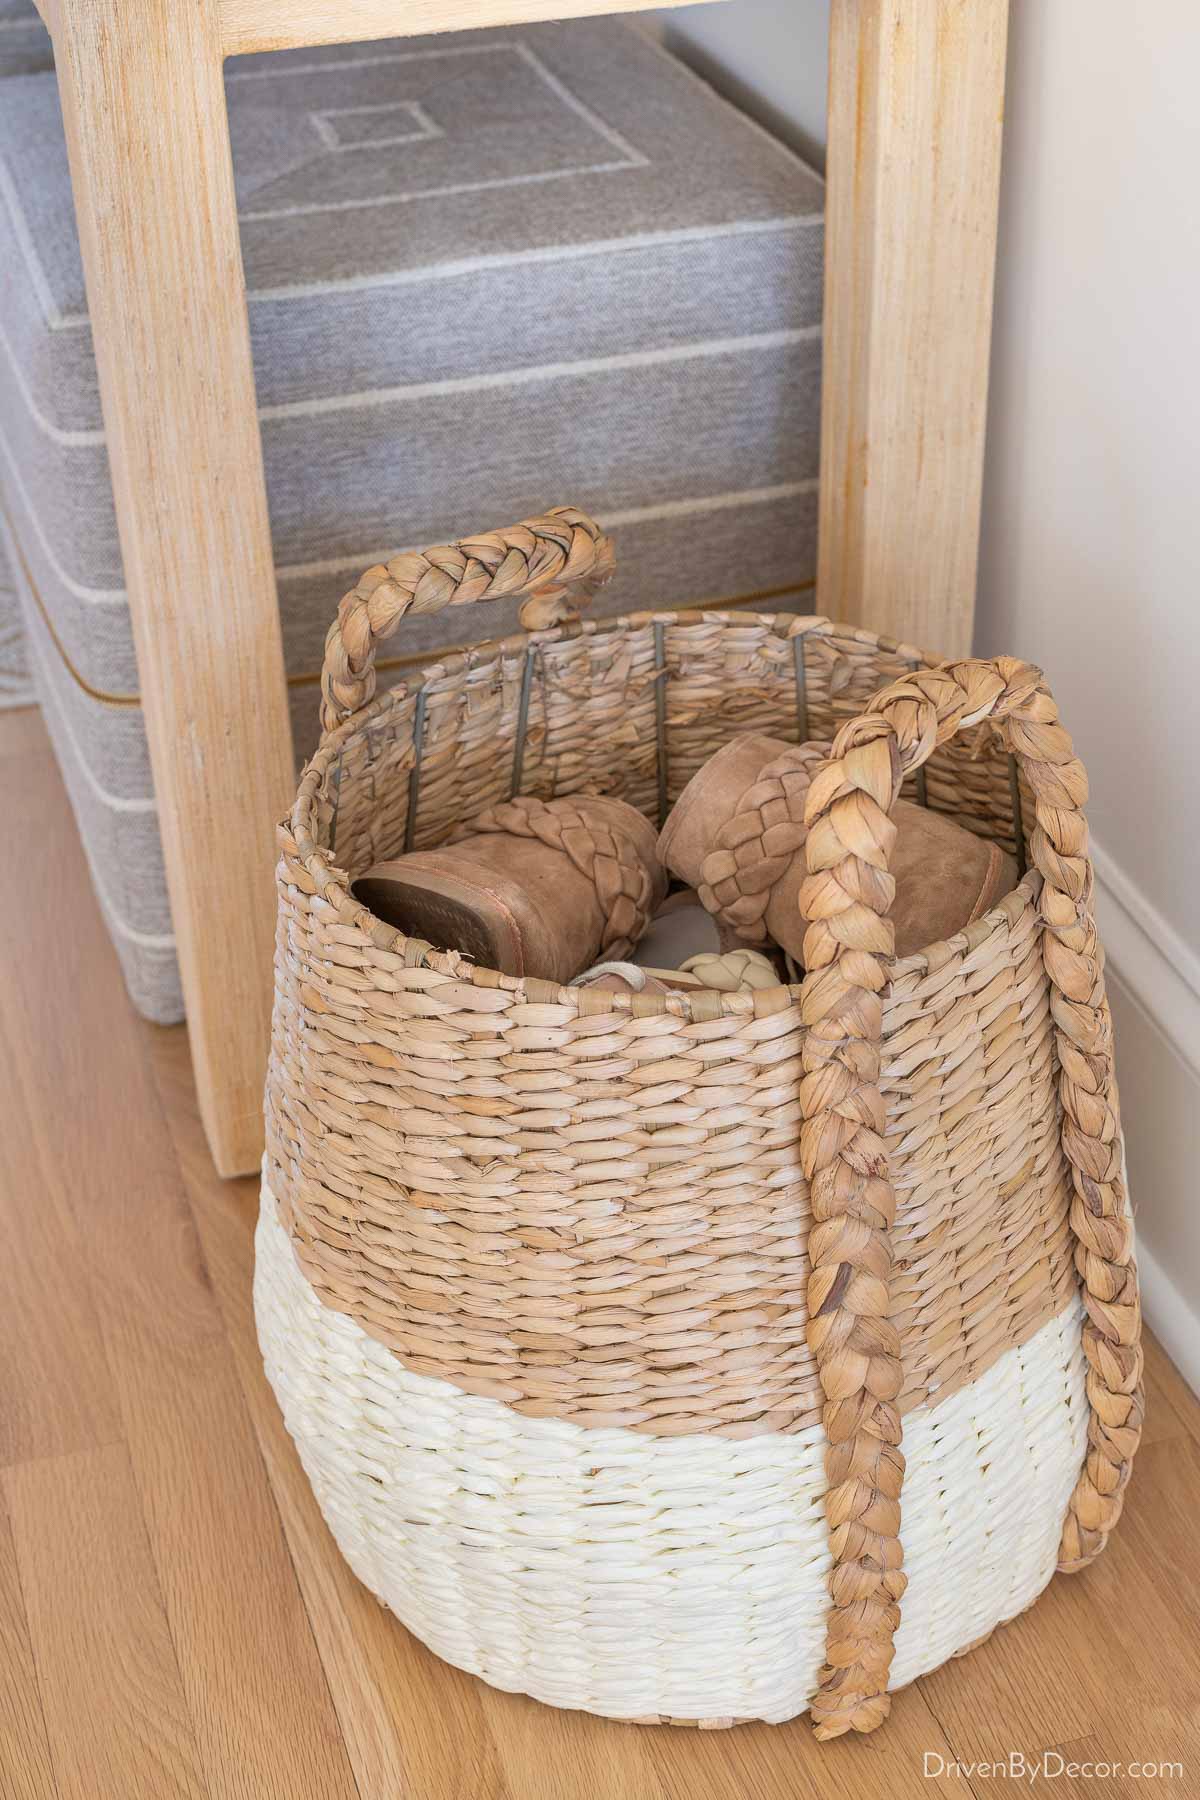 Inexpensive, But Decorative Storage Baskets - In My Own Style